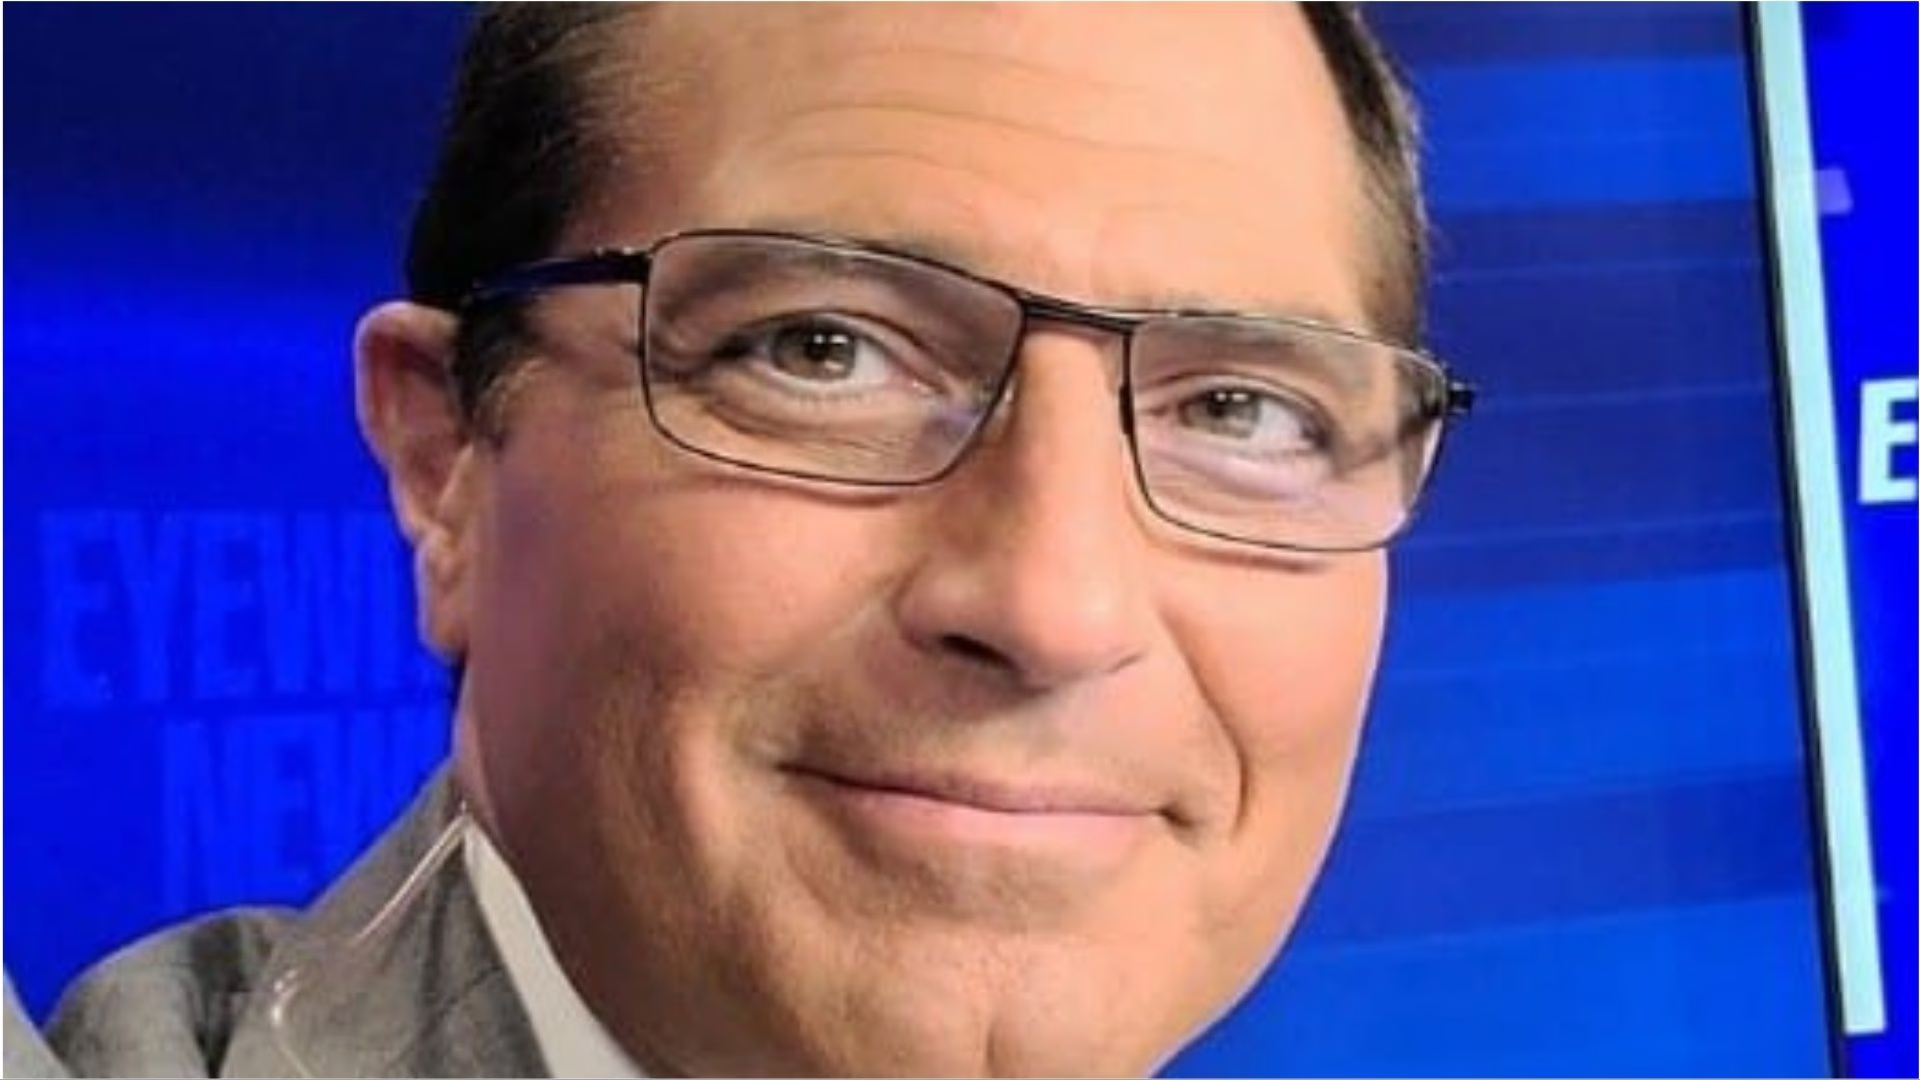 What Ken Rosato Said on Hot Mic That Led to His Firing from ABC 7